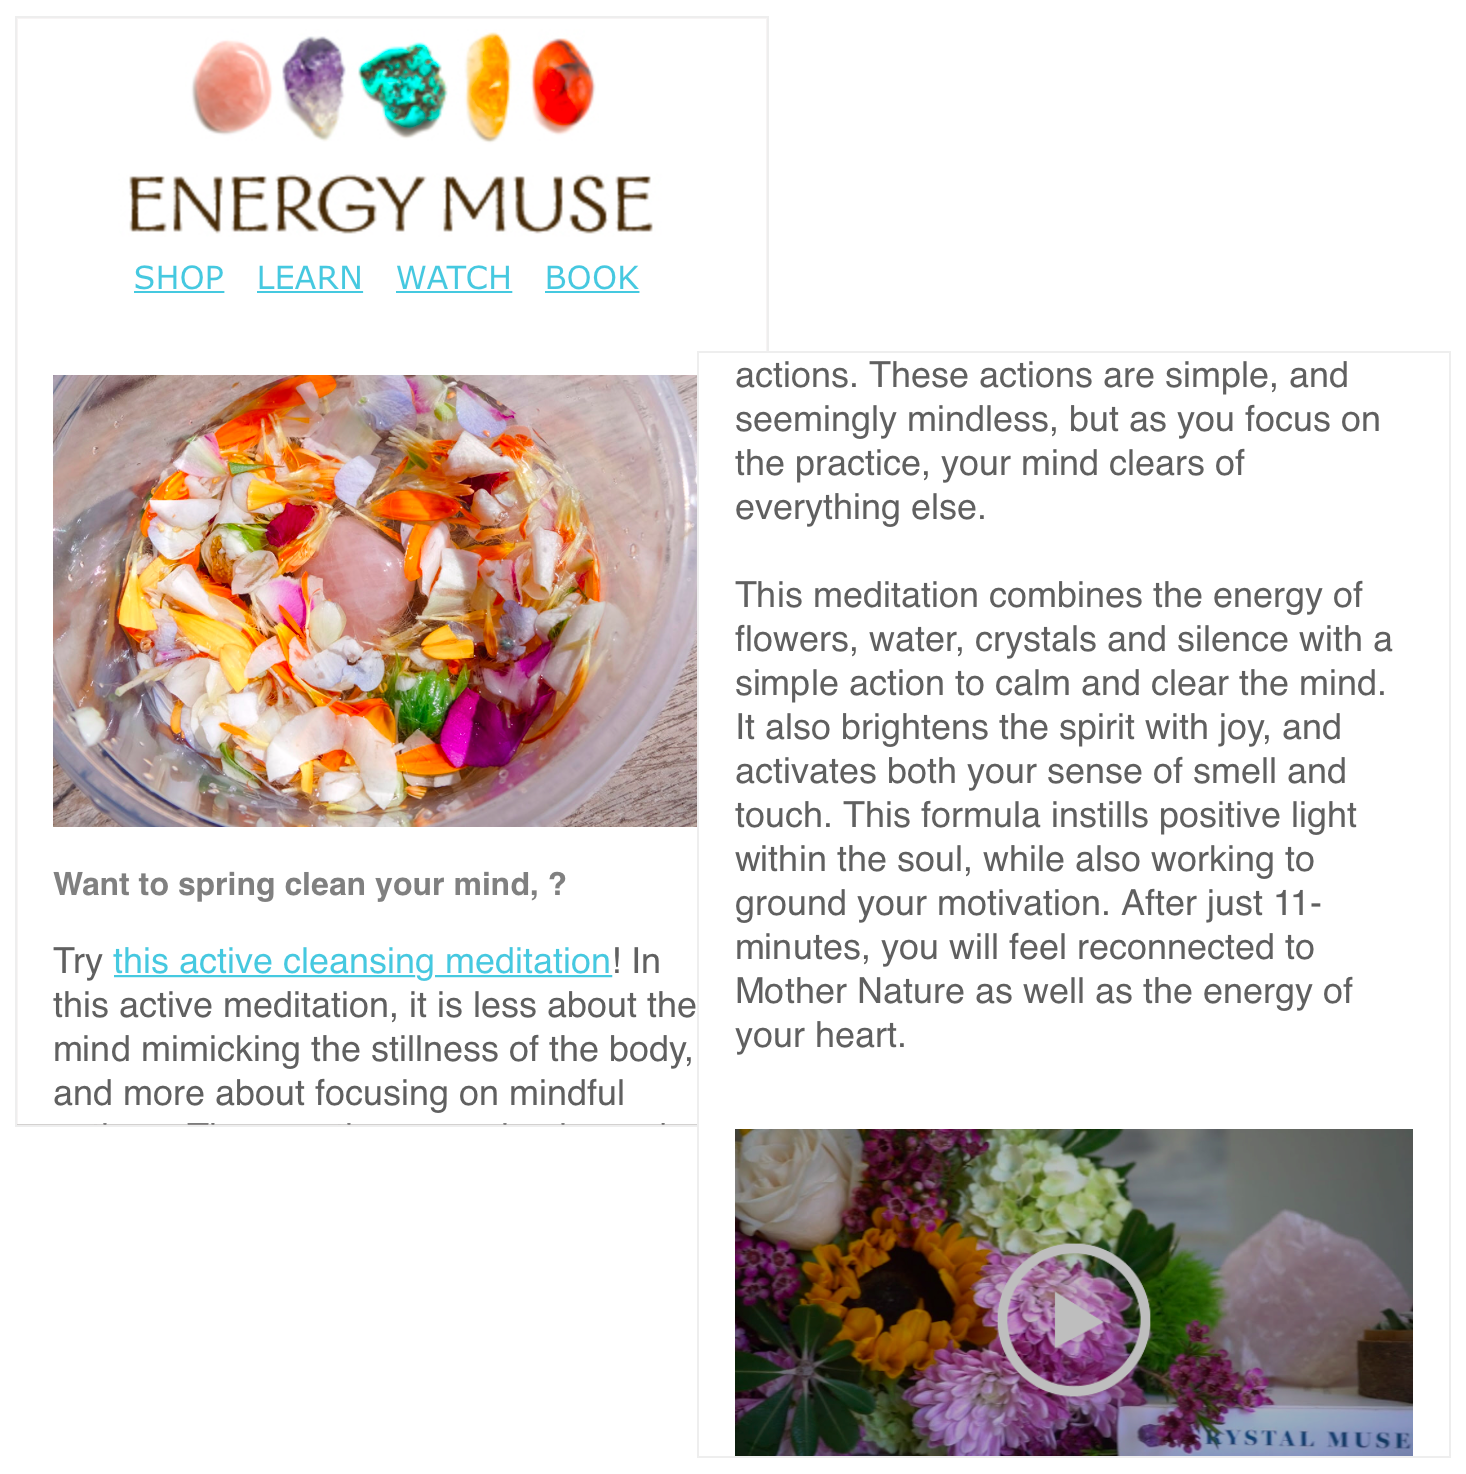 Chrystal store, Energy Muse's information-heavy home page with how-to tips.